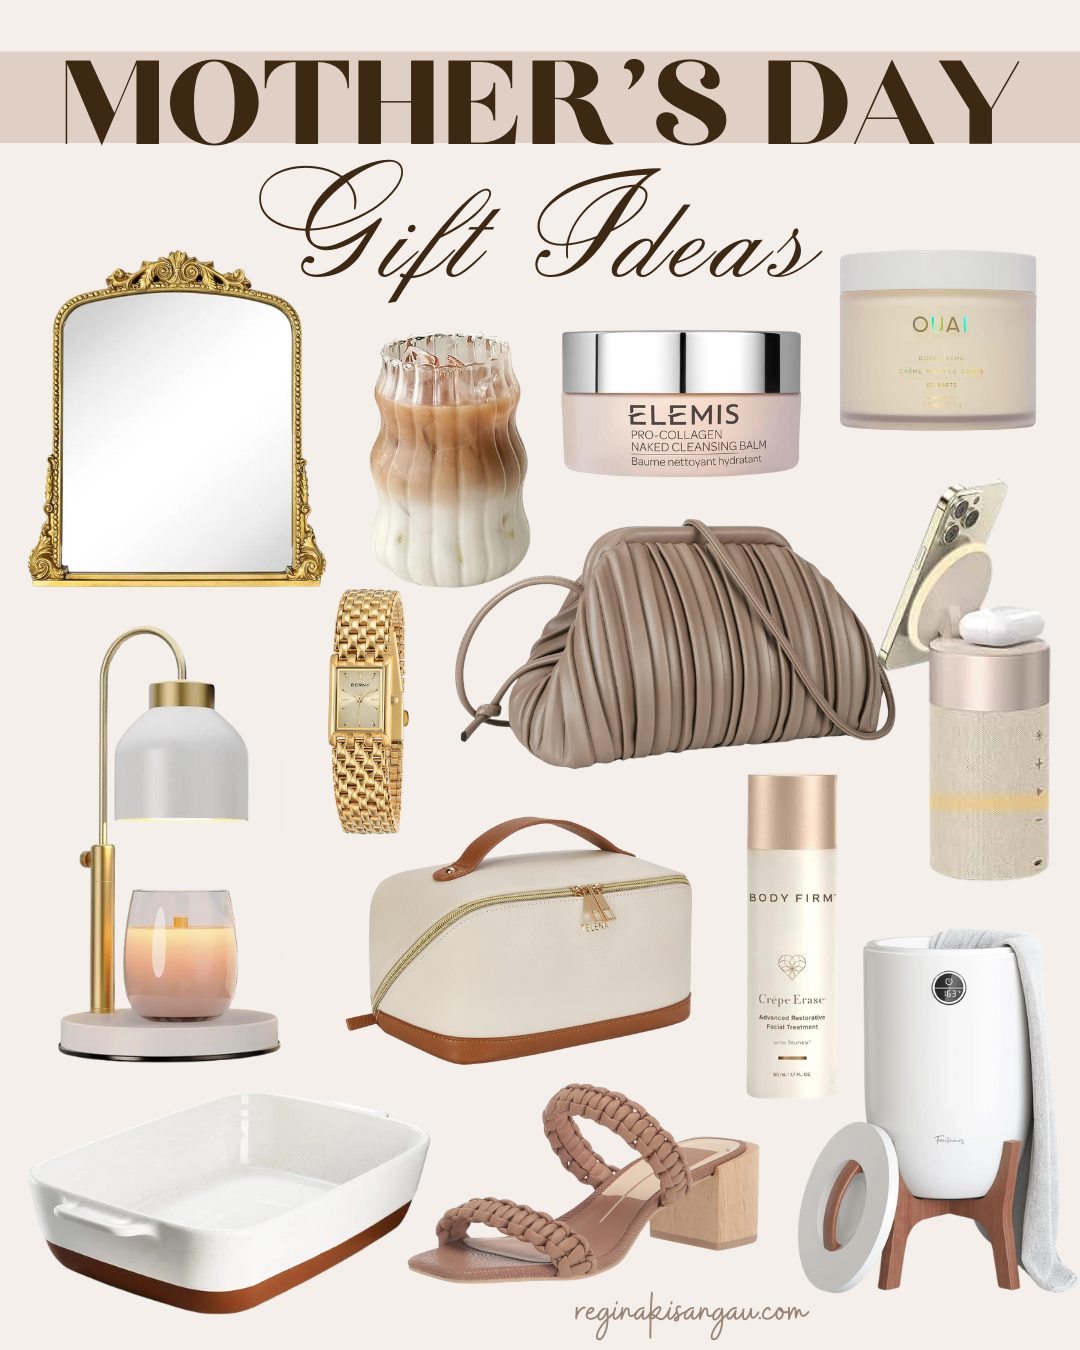 Aesthetic Mother’s Day Gift Ideas to Treat Her on May 12th!